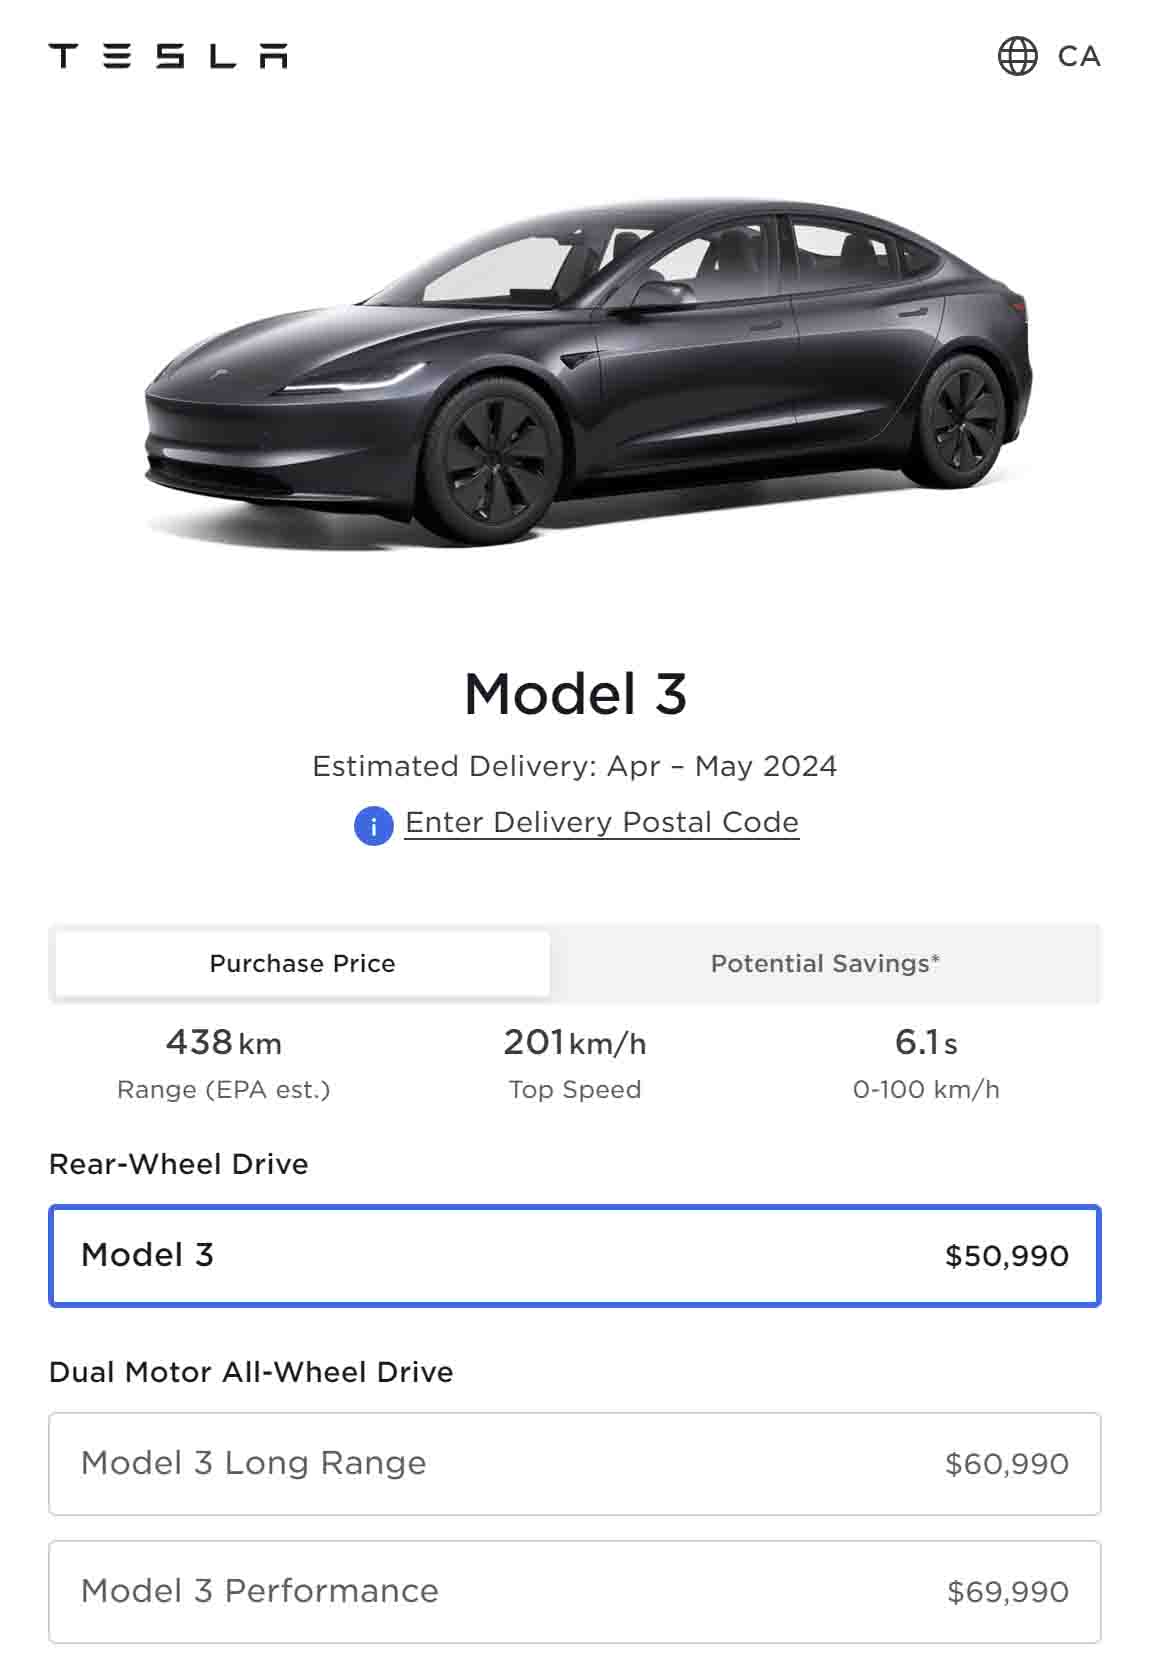 Tesla Model 3 Prices in Canada